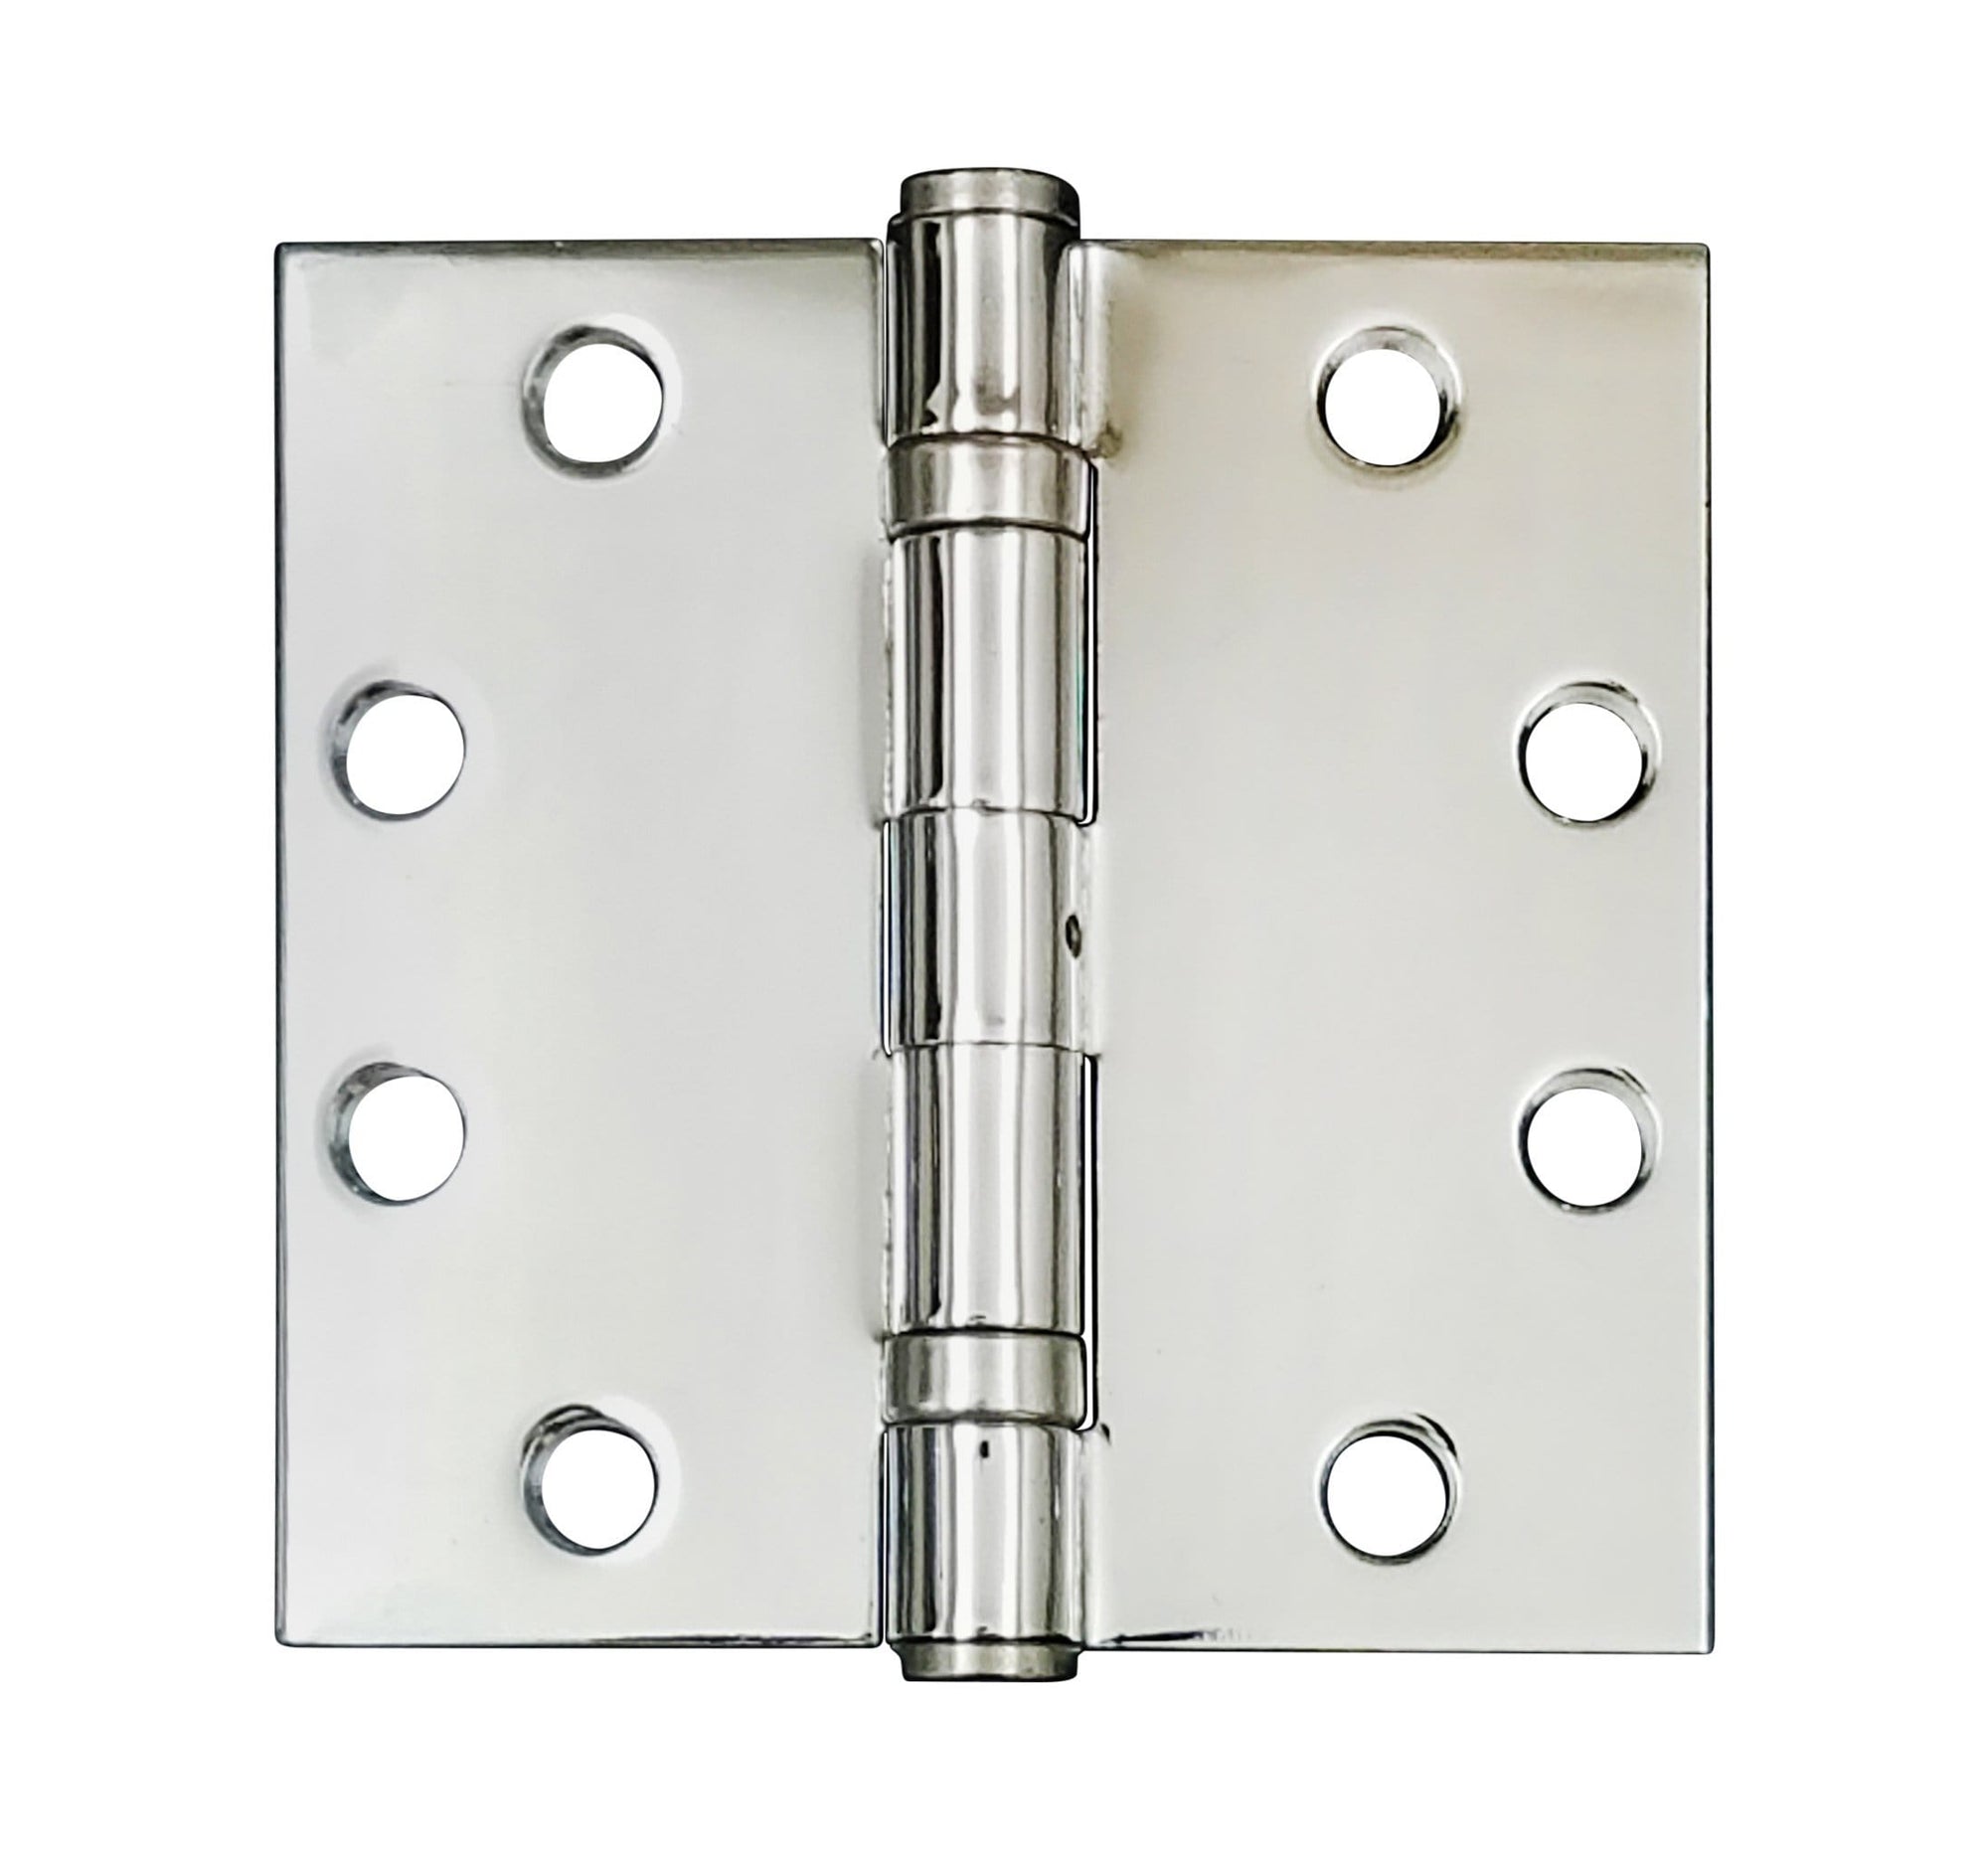 4 1/2" X 4 1/2" With Square Corners Polished Chrome Commercial Ball Bearing Hinge - Sold In Pairs